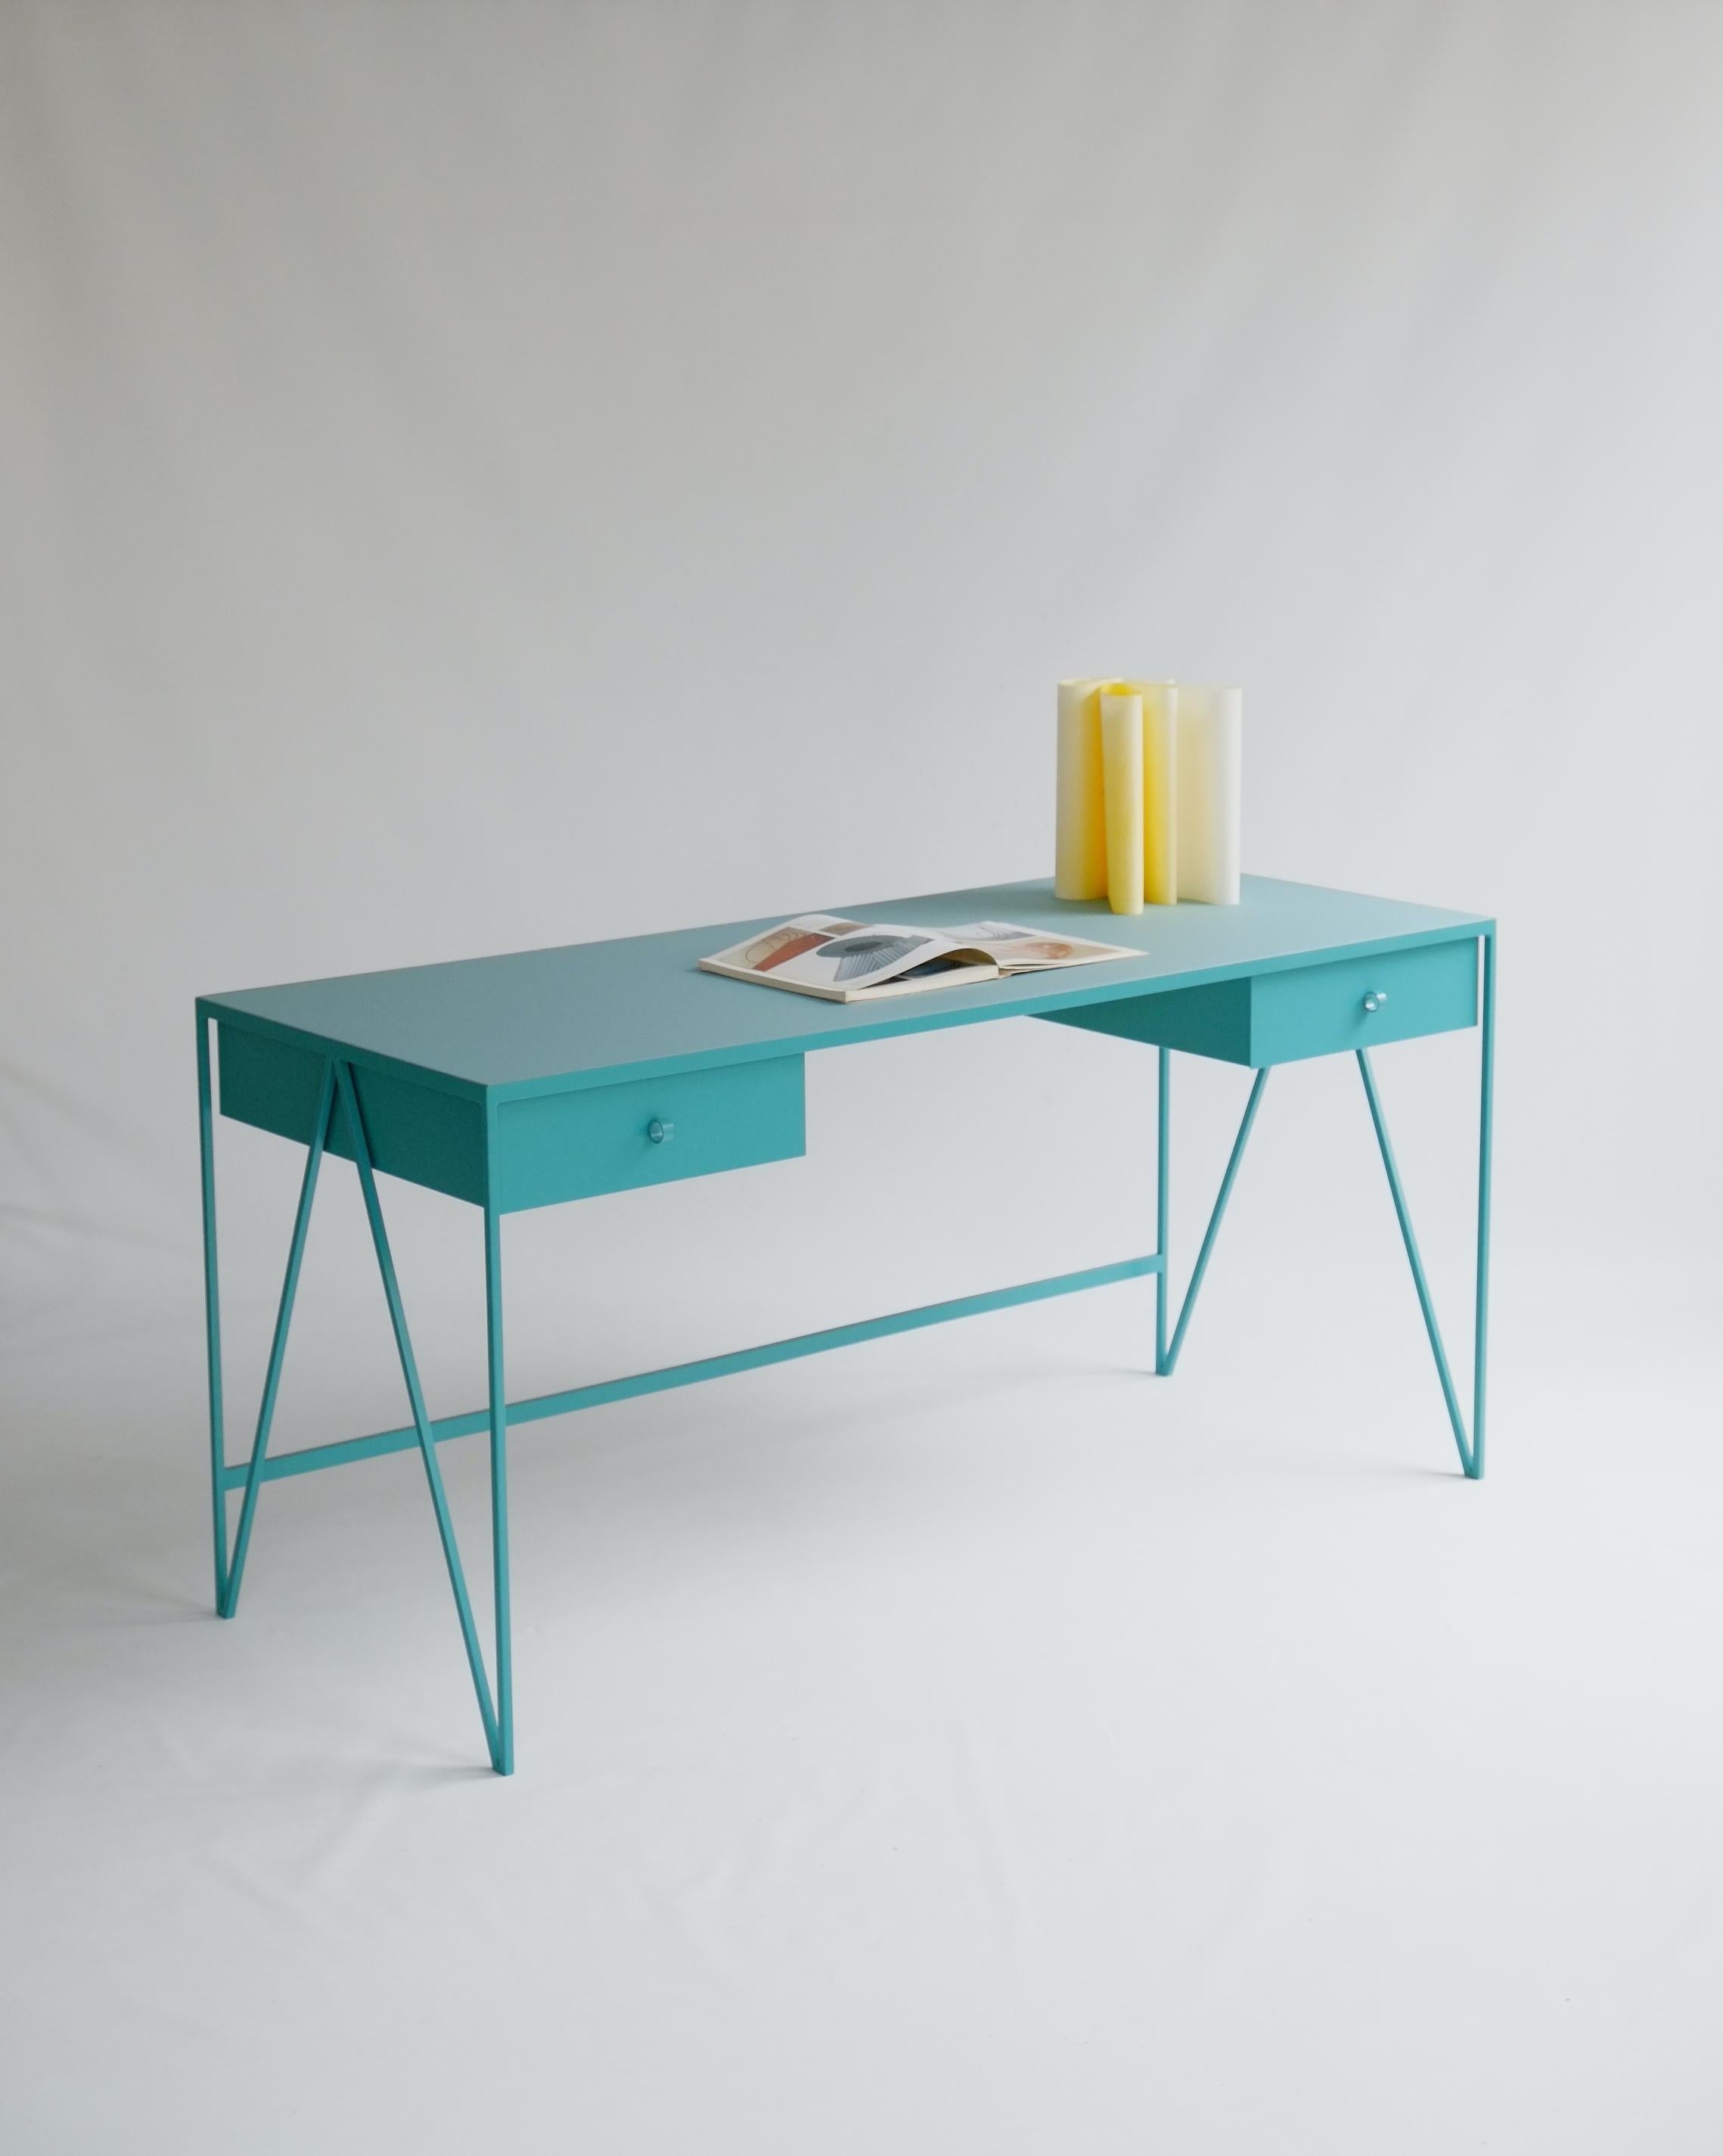 This large turquoise study desk is made with a powder coated steel frame and a beautiful natural linoleum top made out of linseed oil. This modern minimal desk has two steel drawers suspended underneath the tabletop with our Loop handles. The soft